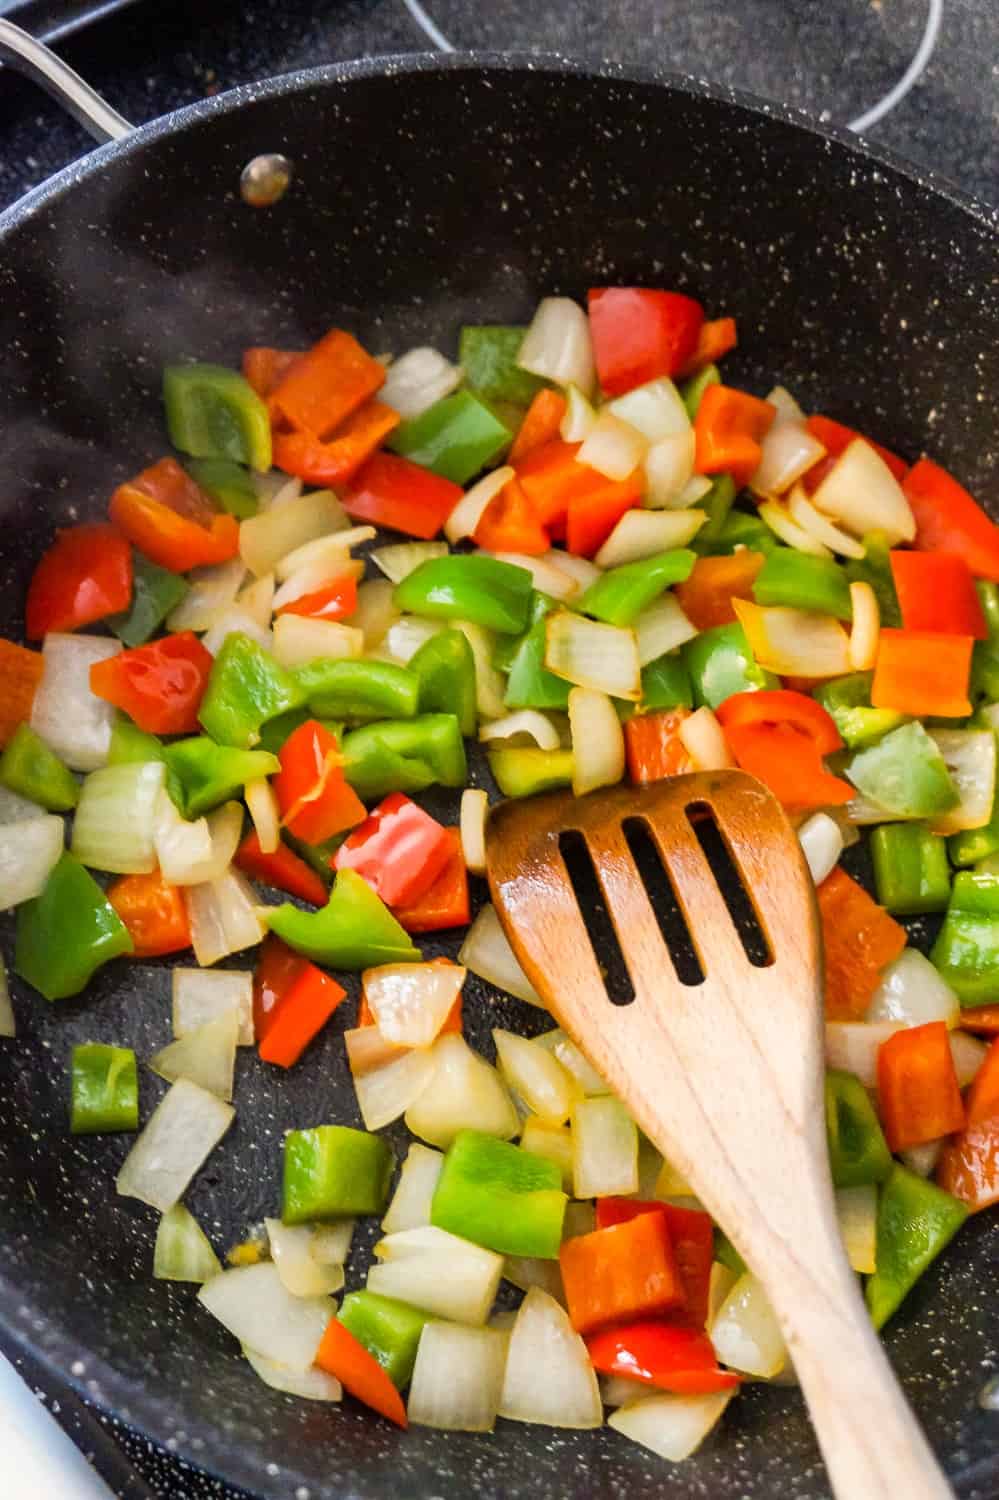 diced red peppers, green peppers and onions in a saute pan